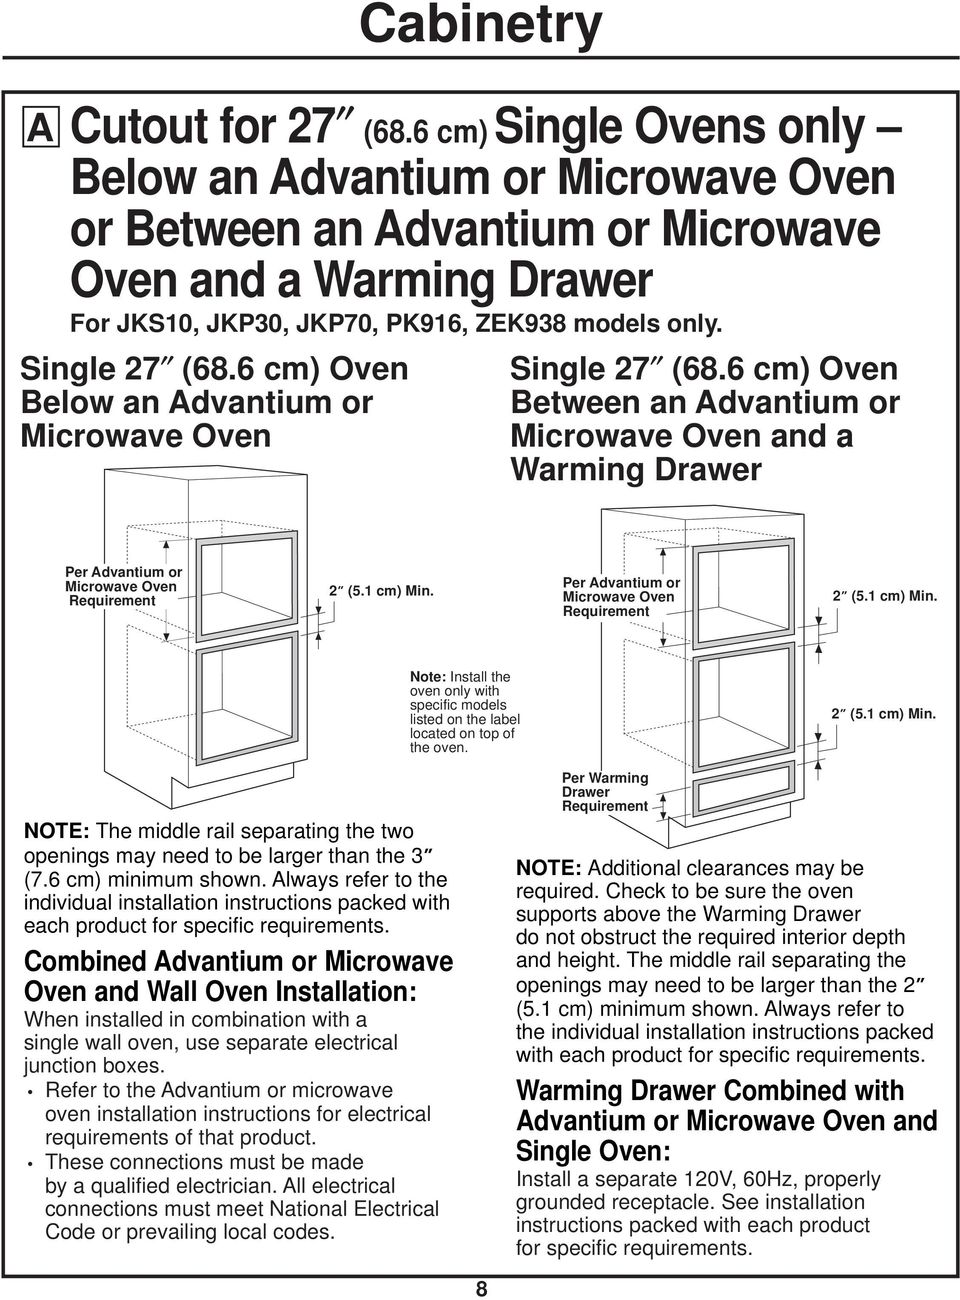 6 cm) Oven Below an Advantium or Microwave Oven Single 27 (68.6 cm) Oven Between an Advantium or Microwave Oven and a Warming Drawer Per Advantium or Microwave Oven Requirement 2 (5.1 cm) Min.